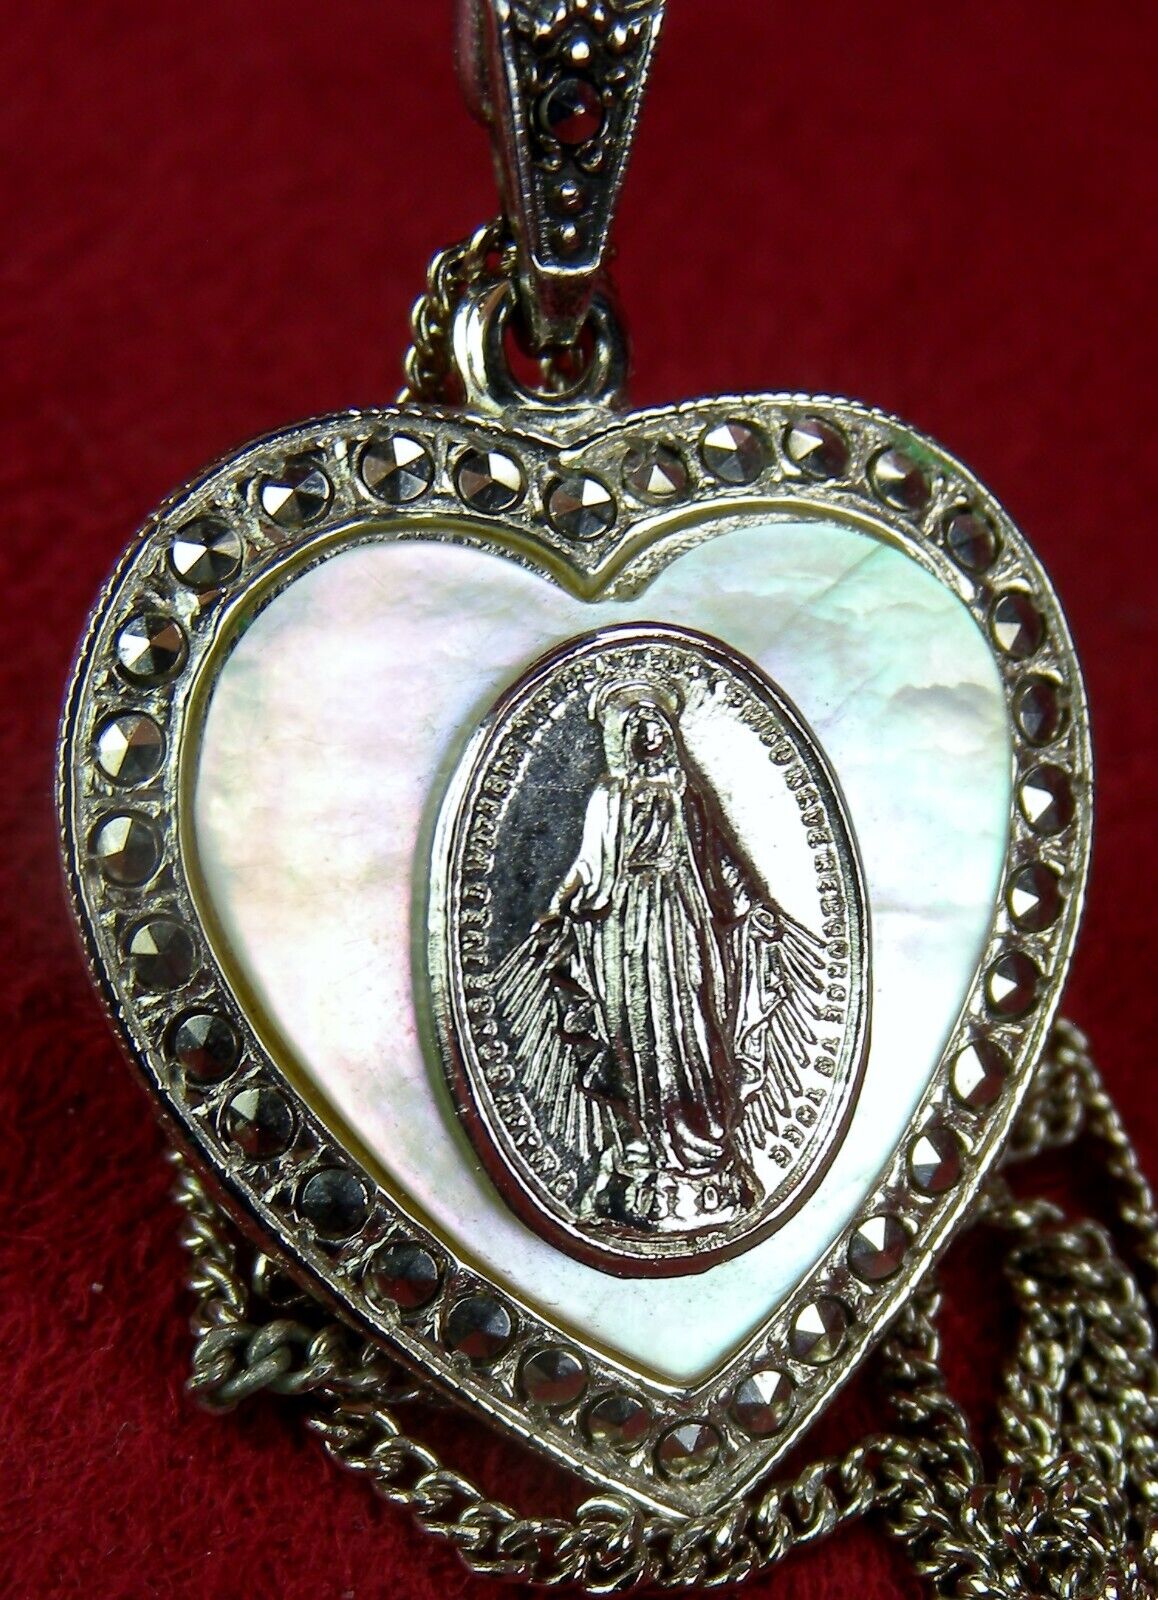 VINTAGE 1930 CATHOLIC MIRACULOUS MEDAL CENTENNIAL STERLING MOTHER OF PEARL MEDAL